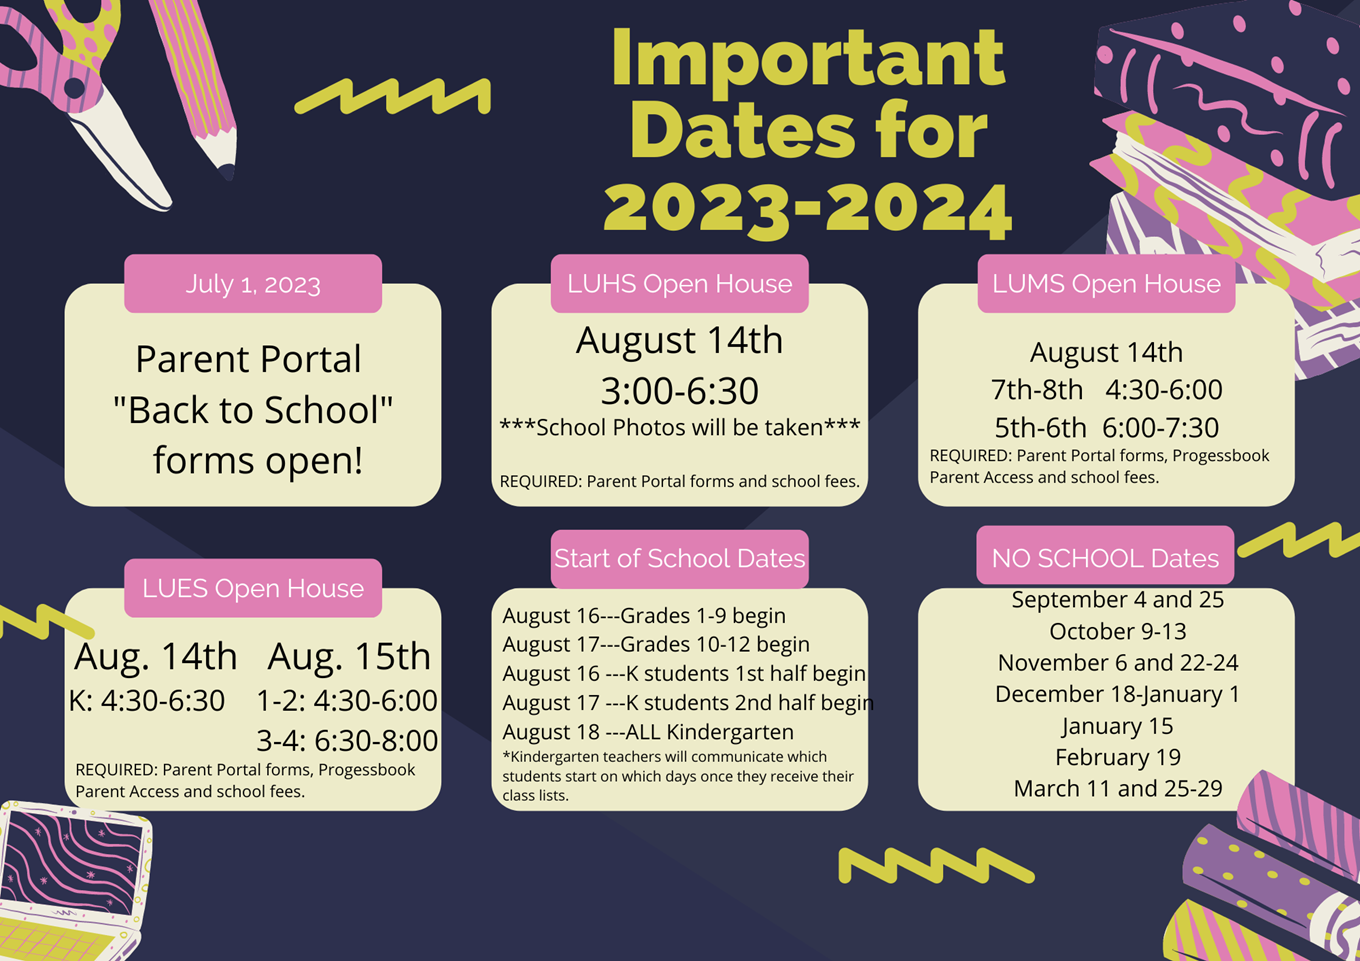 Important Dates for 2023-2024